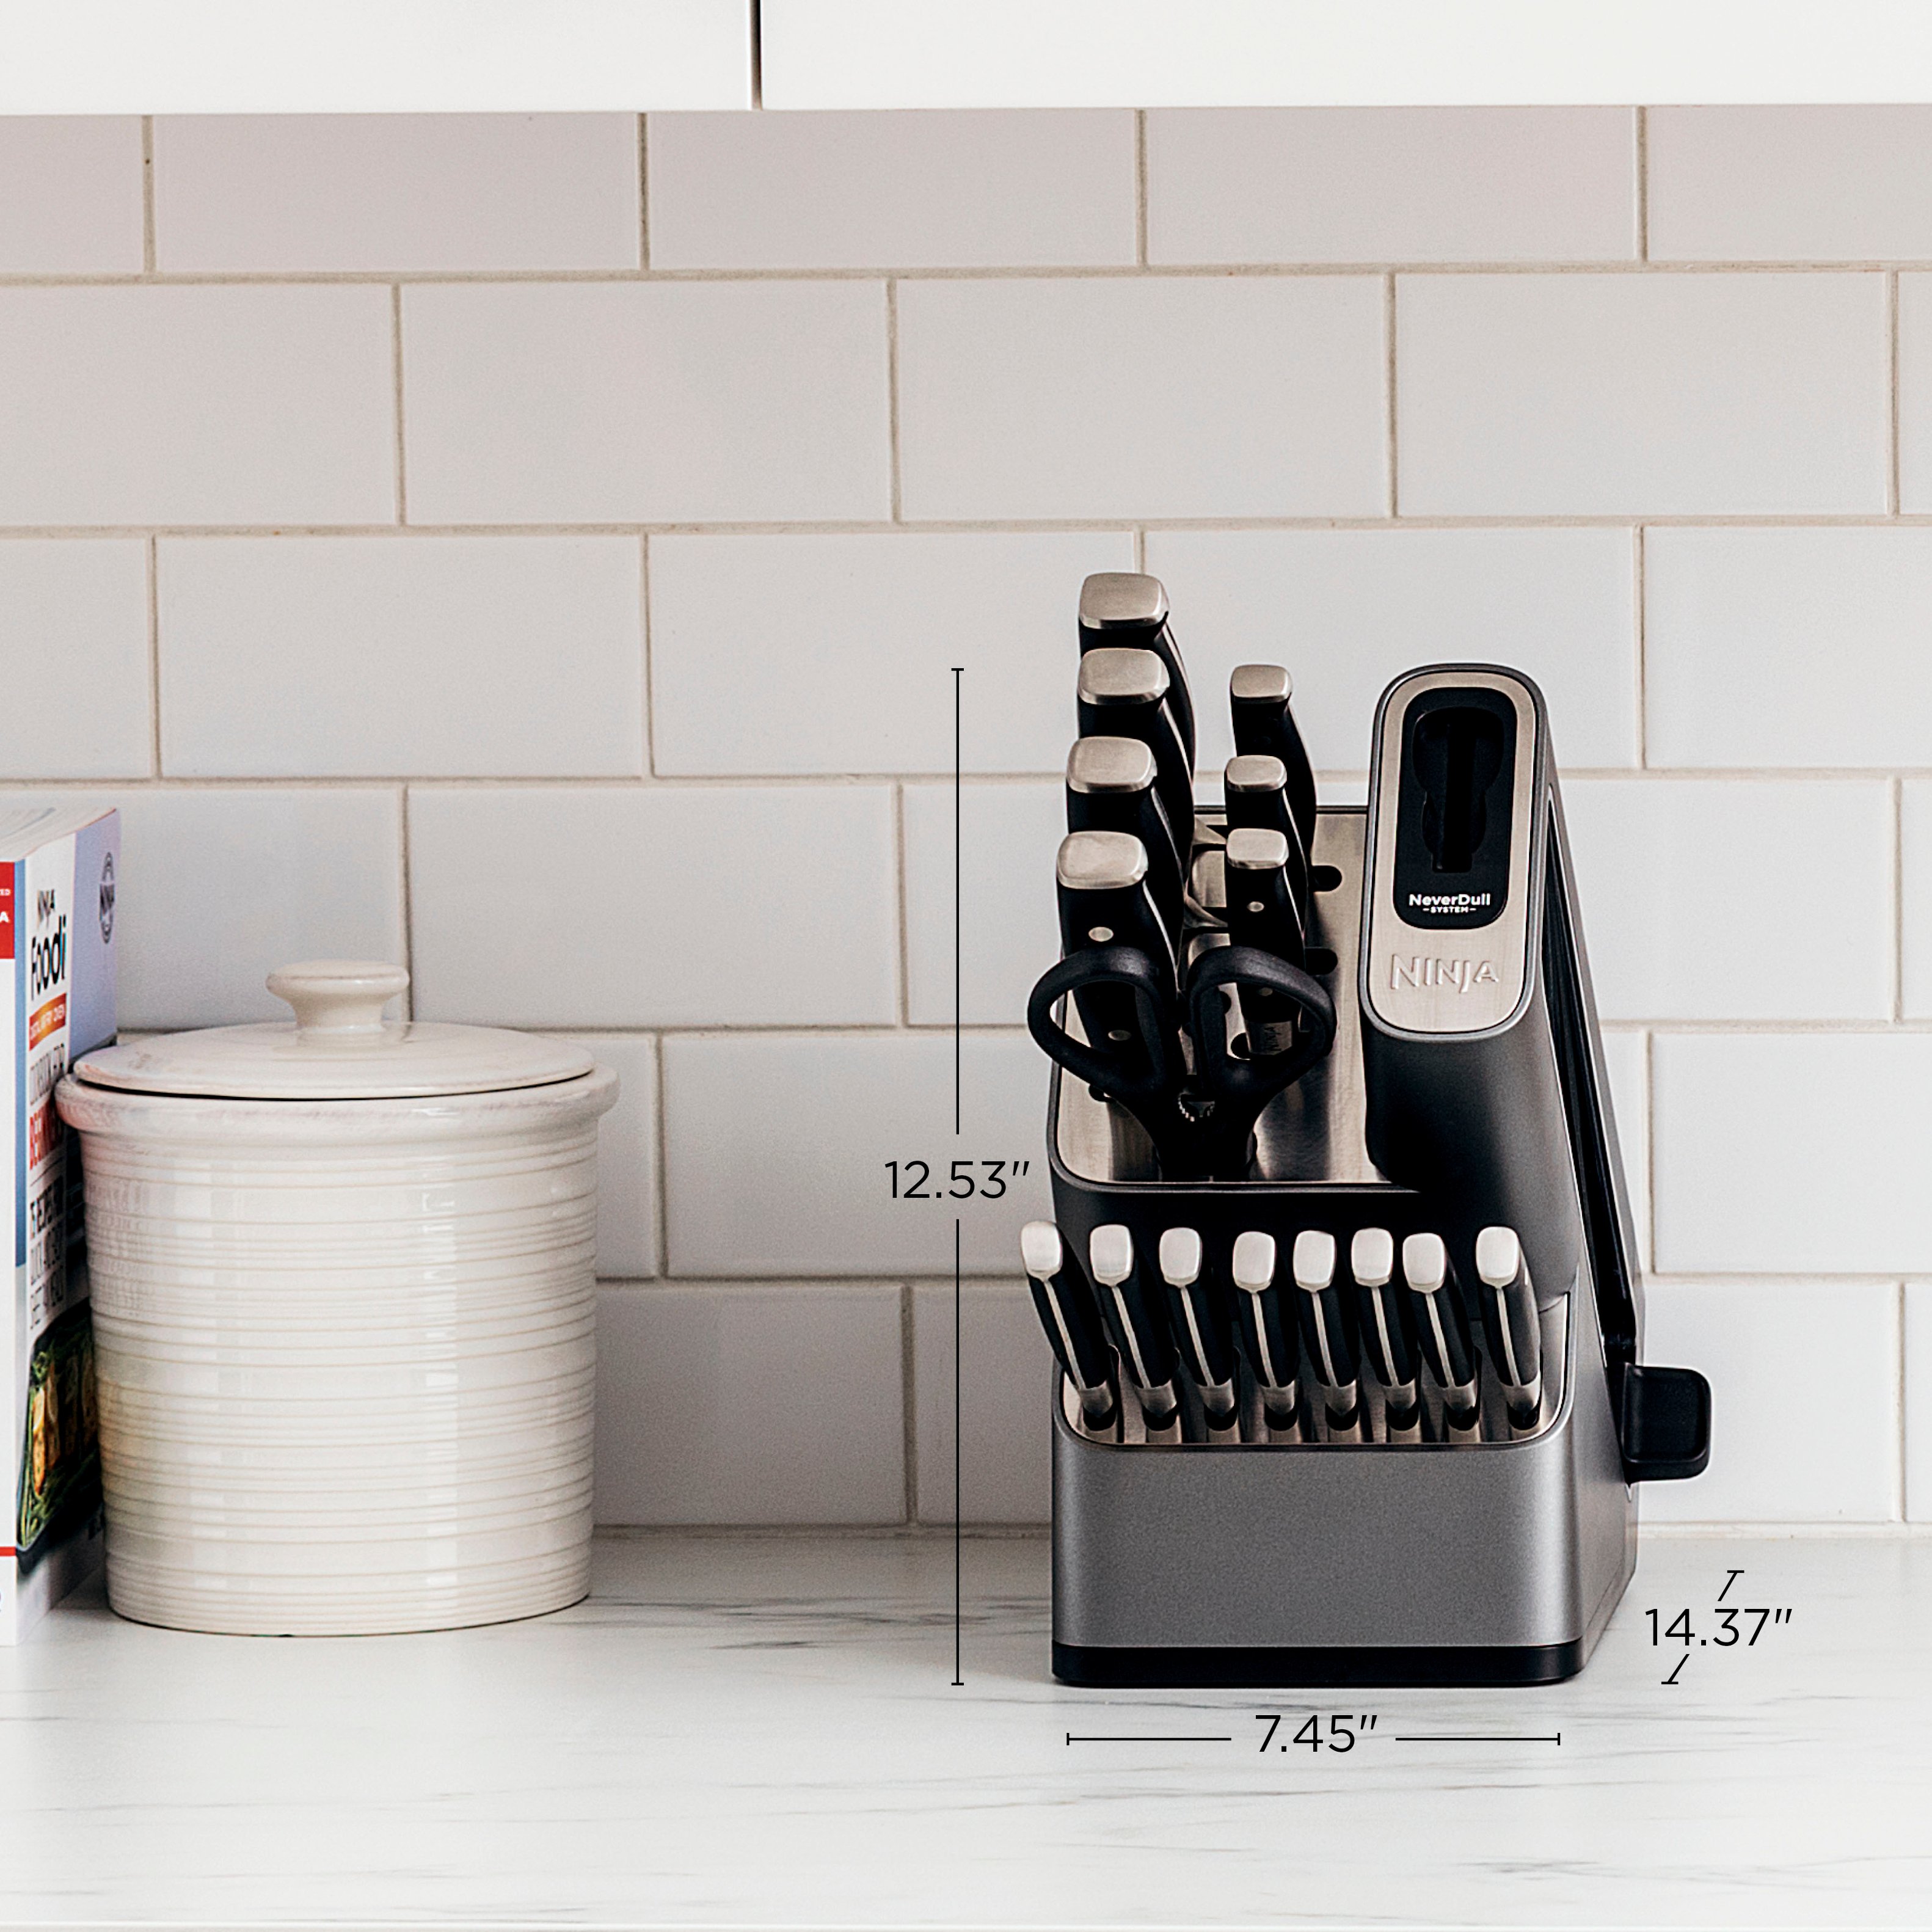 This Ninja Set With Built-In Sharpener Is The Best Knife Block - Forbes  Vetted